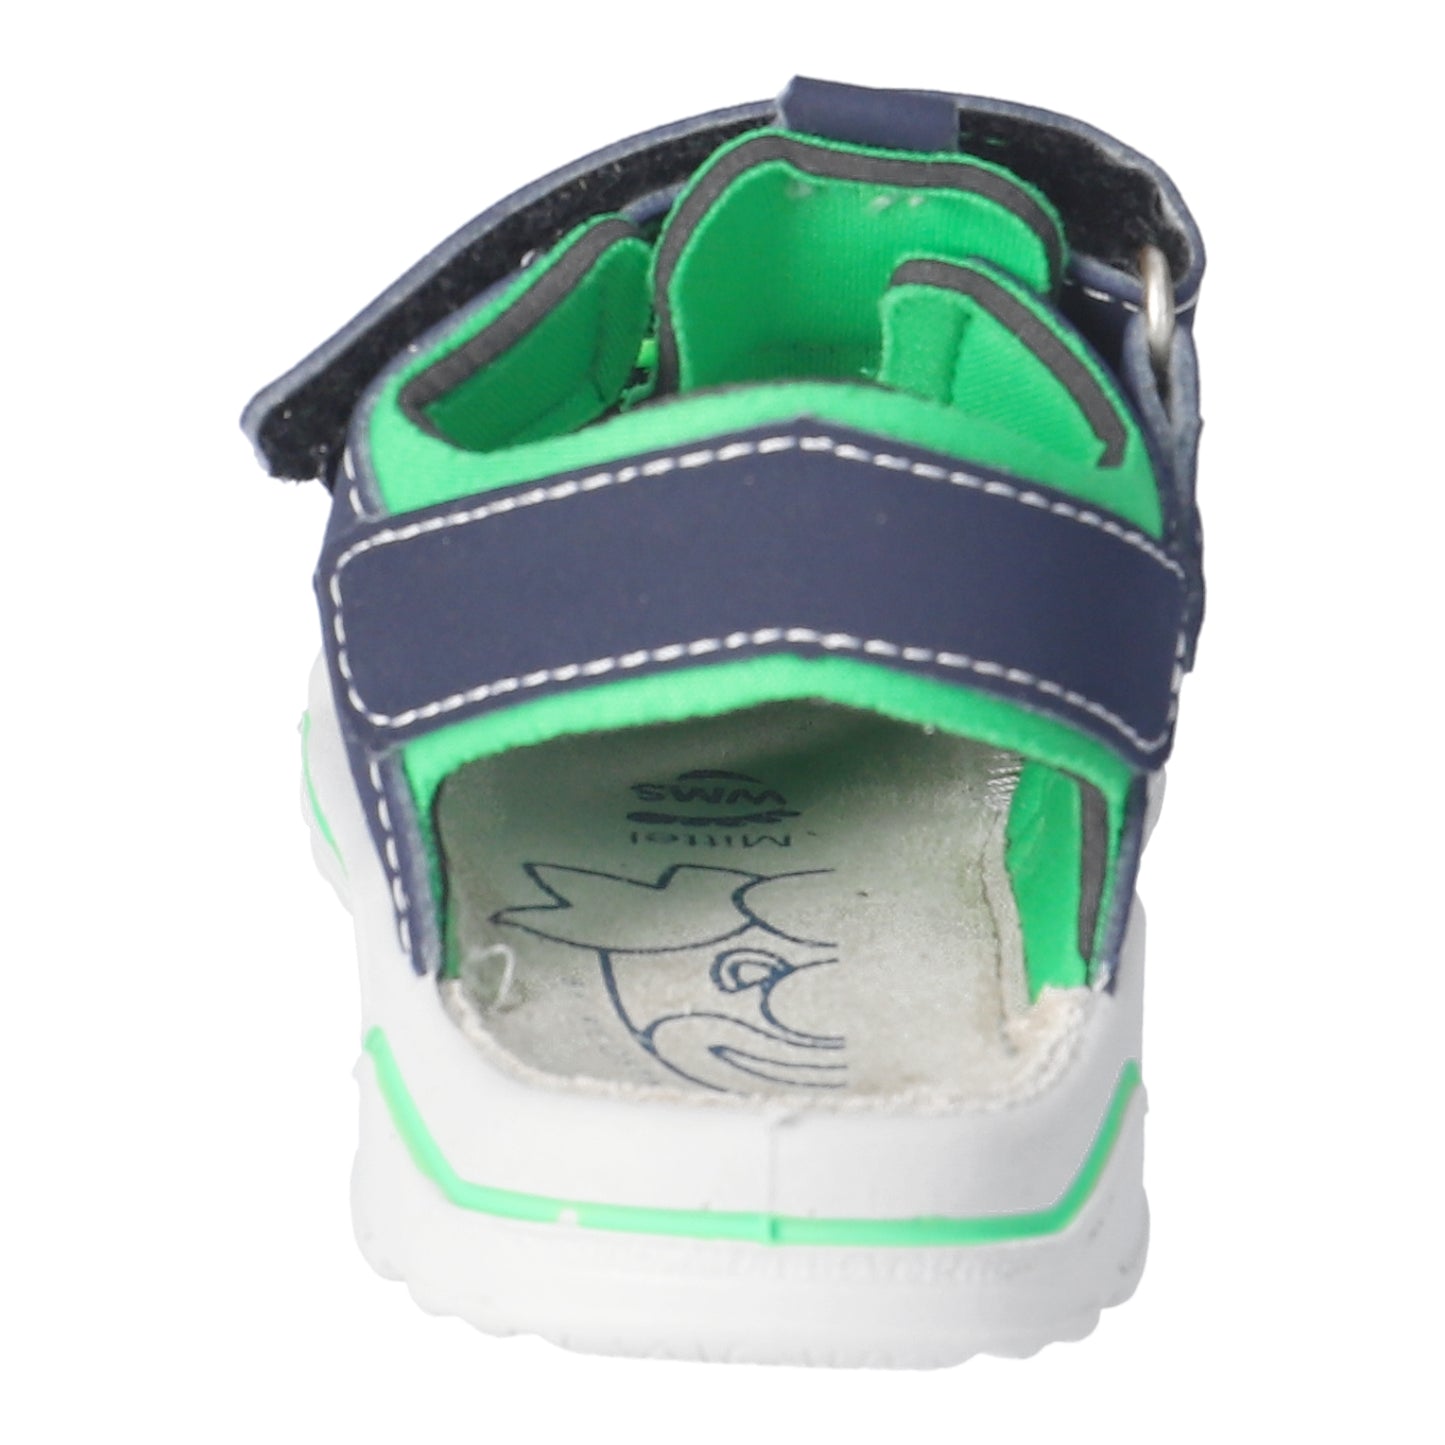 Gery Watersafe Boys Sandal in Navy and Green